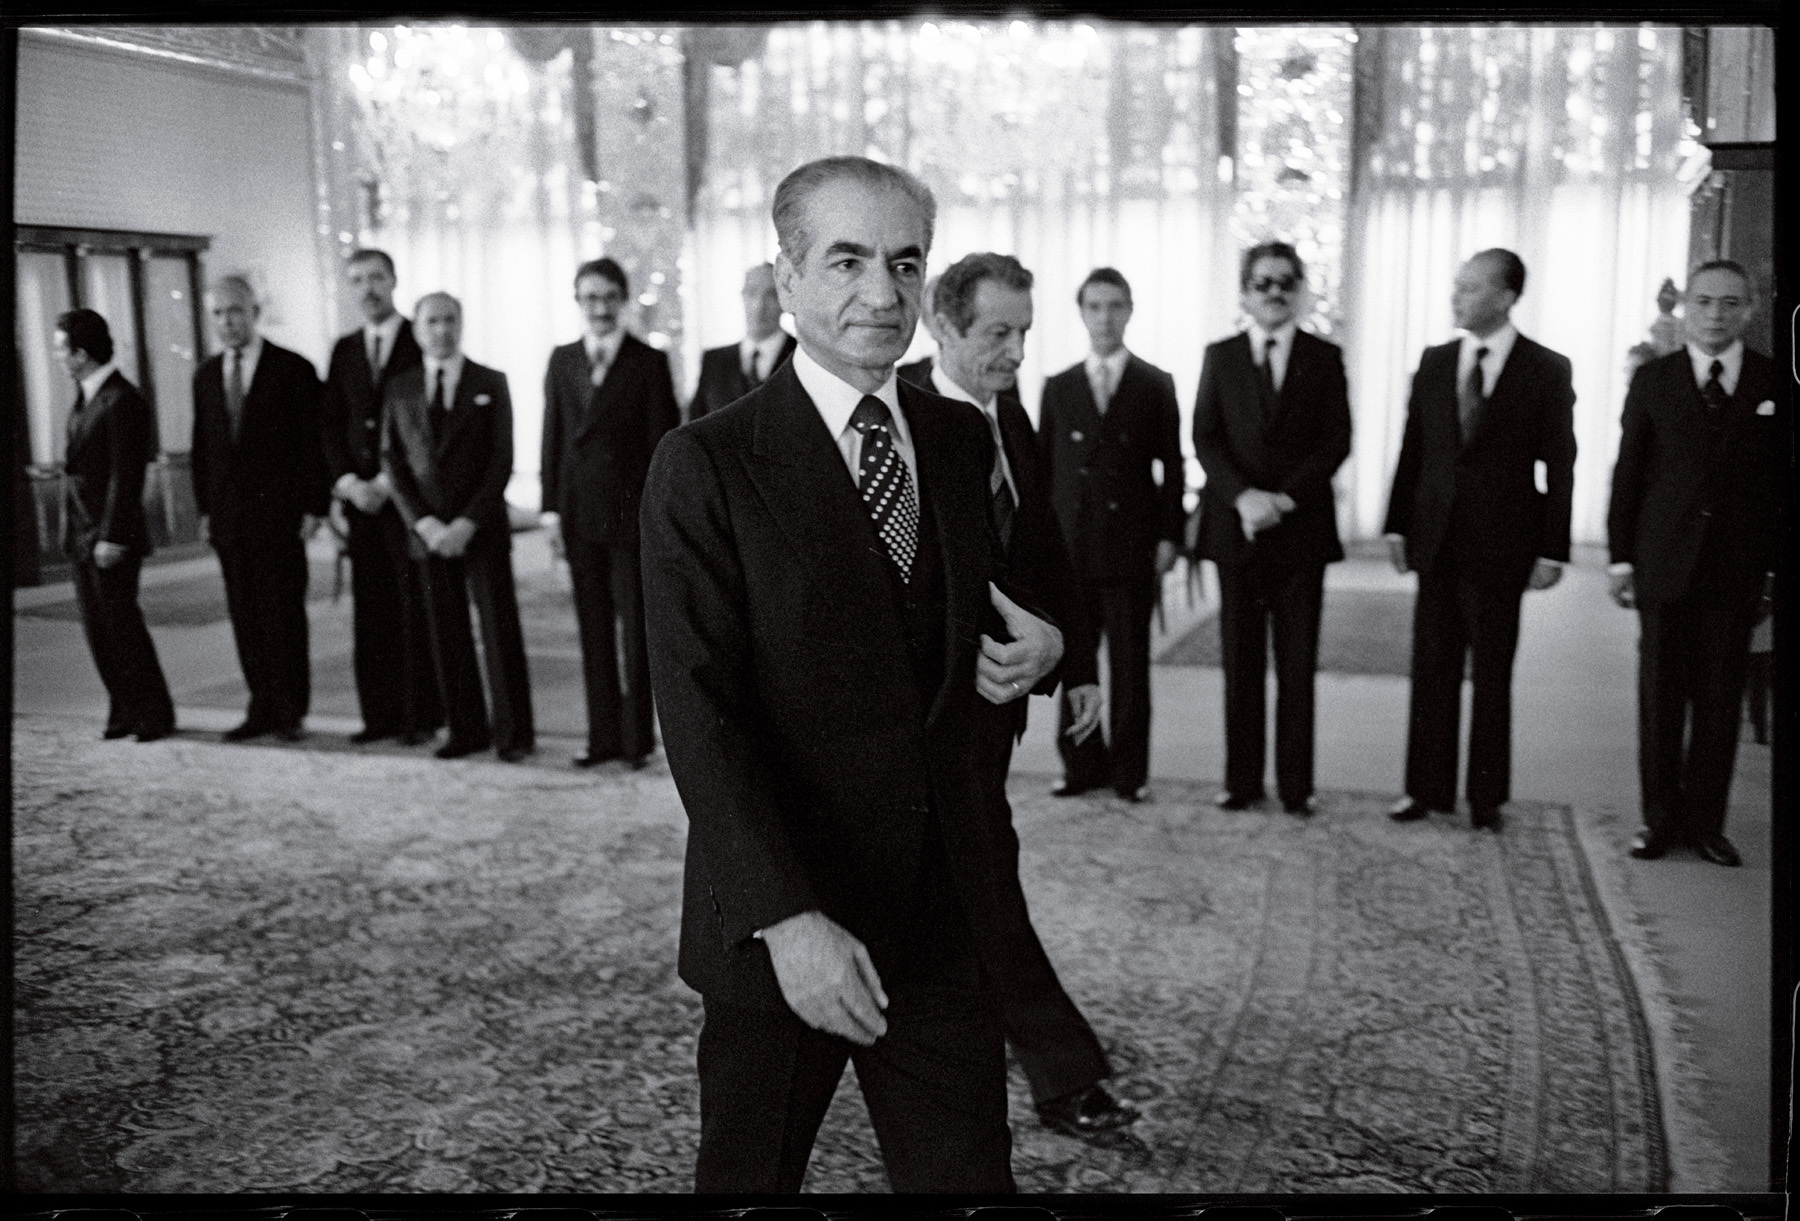 In early January, 1979, the Shah presents, for the last time, a governmental cabinet.